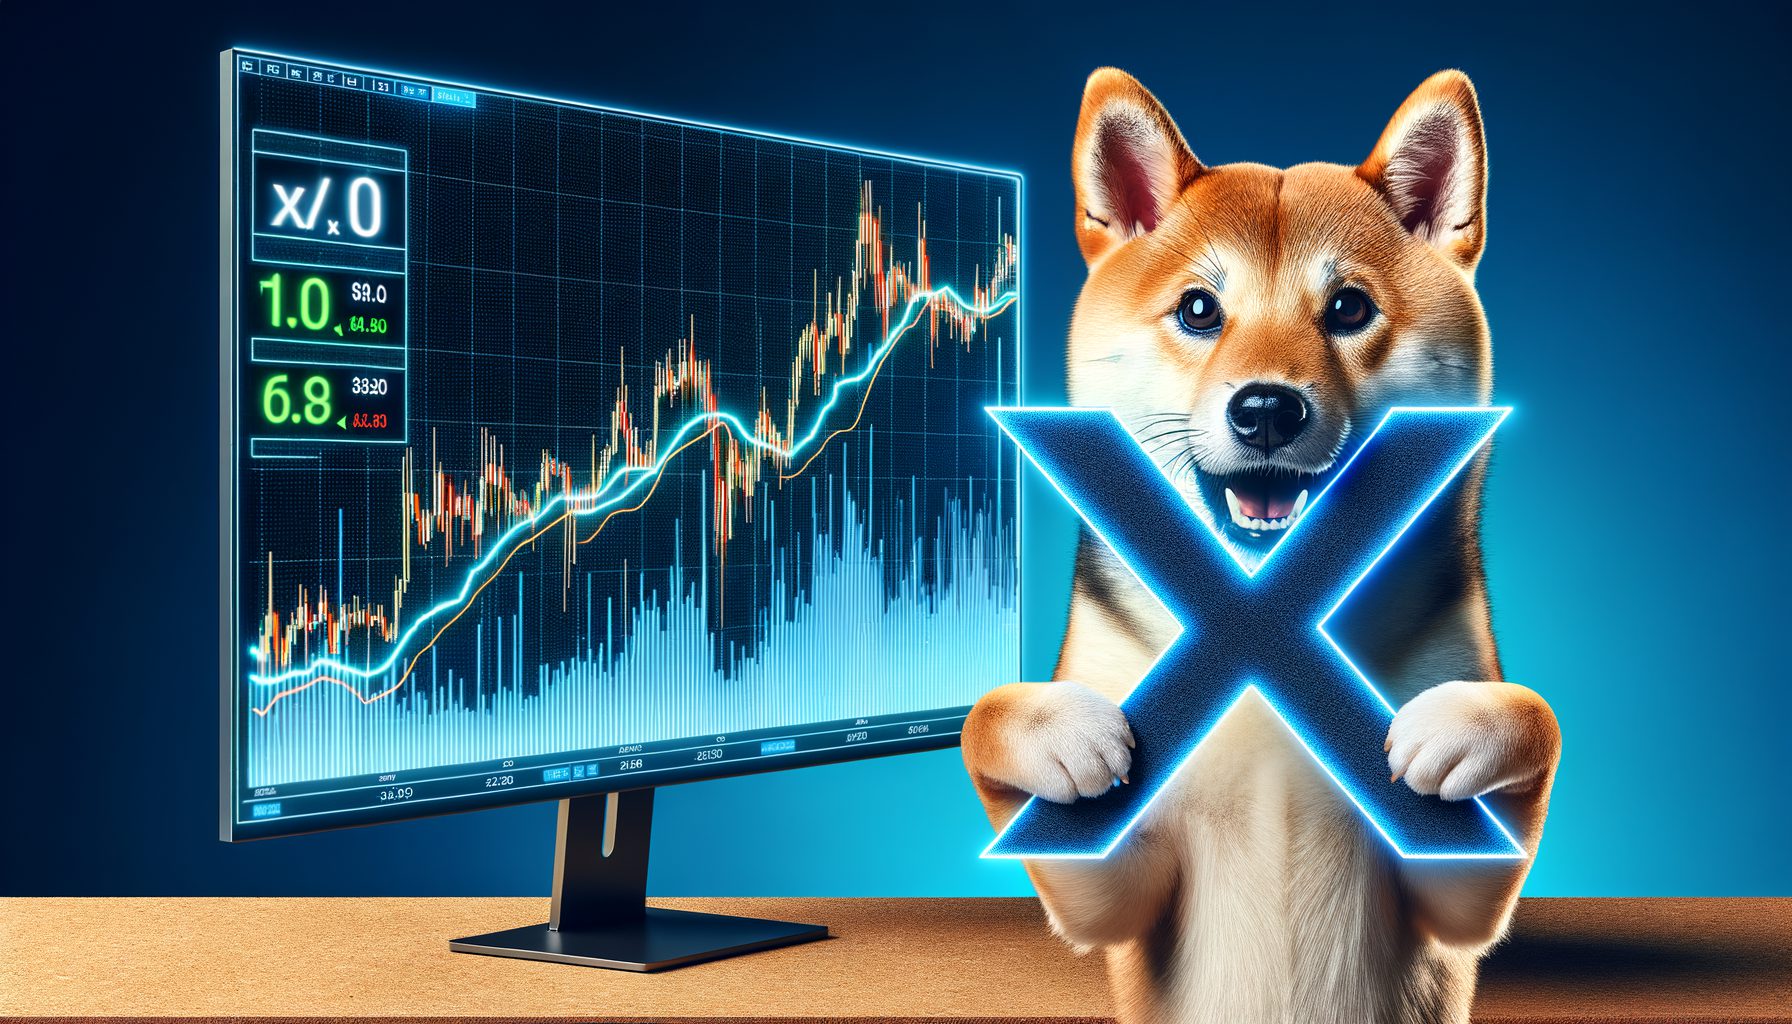 Dogecoin To $0.40 Is One Of The Safest Trades: Here’s Why